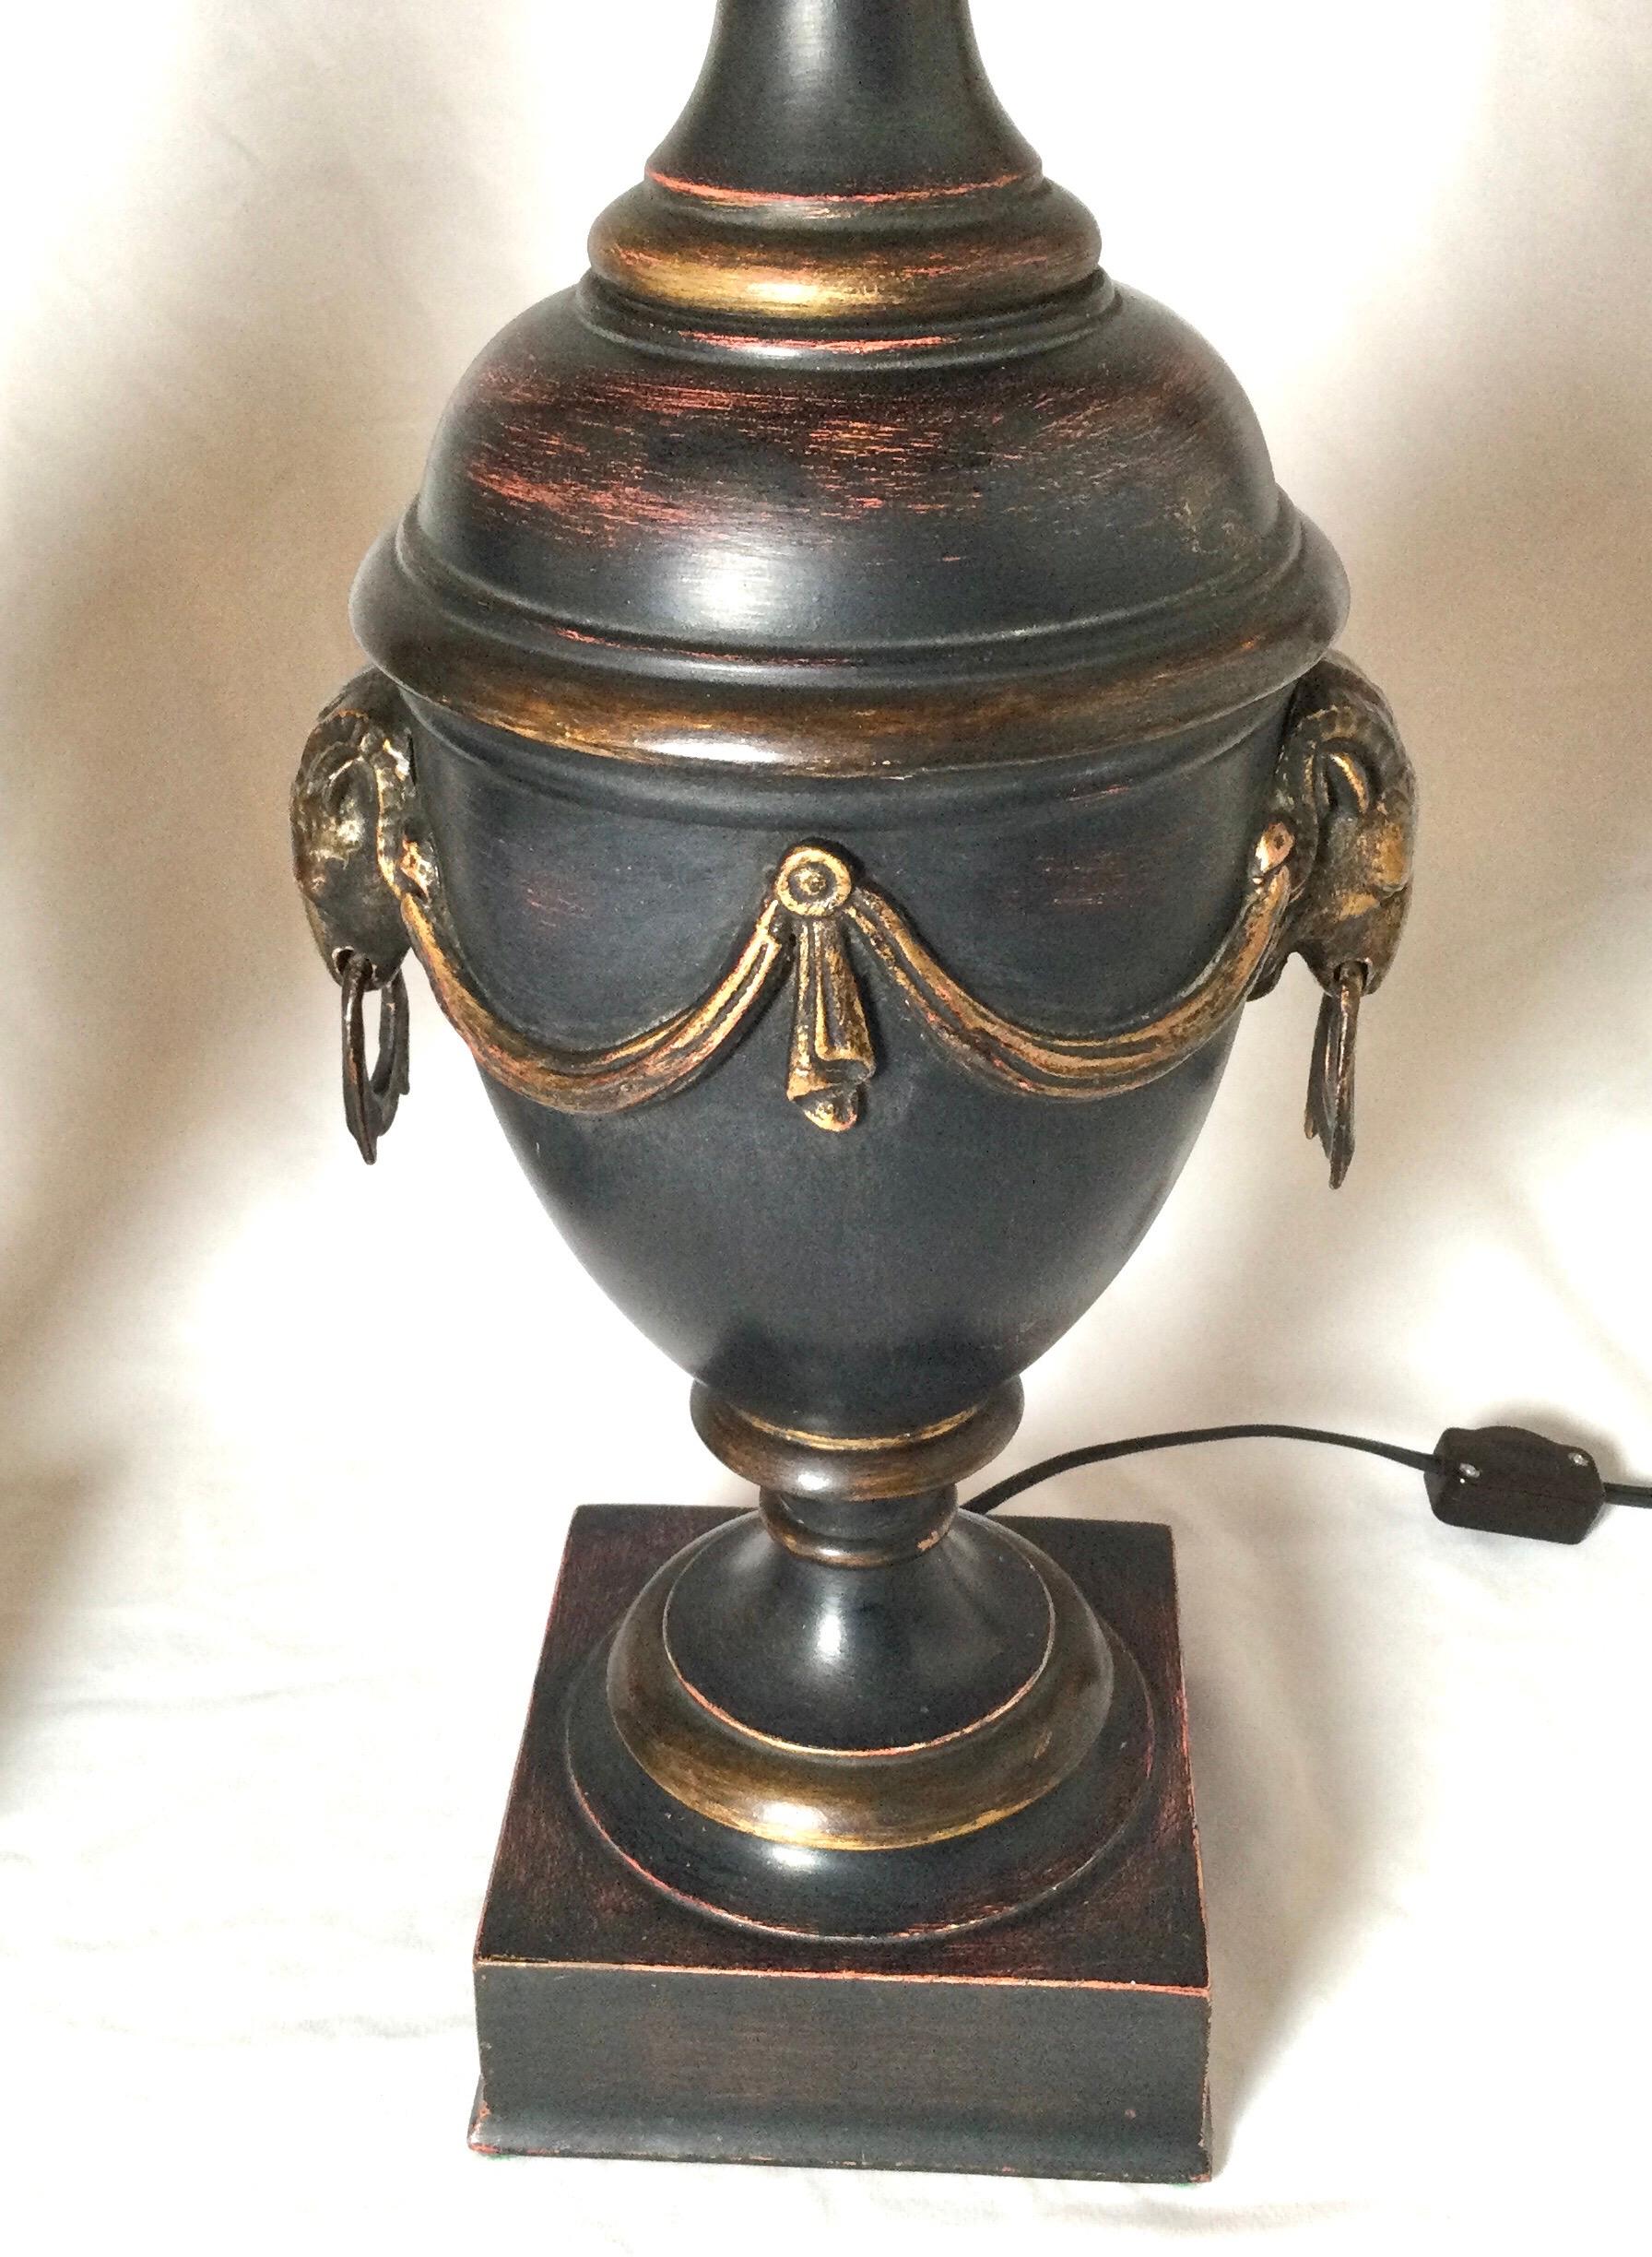 North American Pair of Neoclassical Patinated Urn Lamps